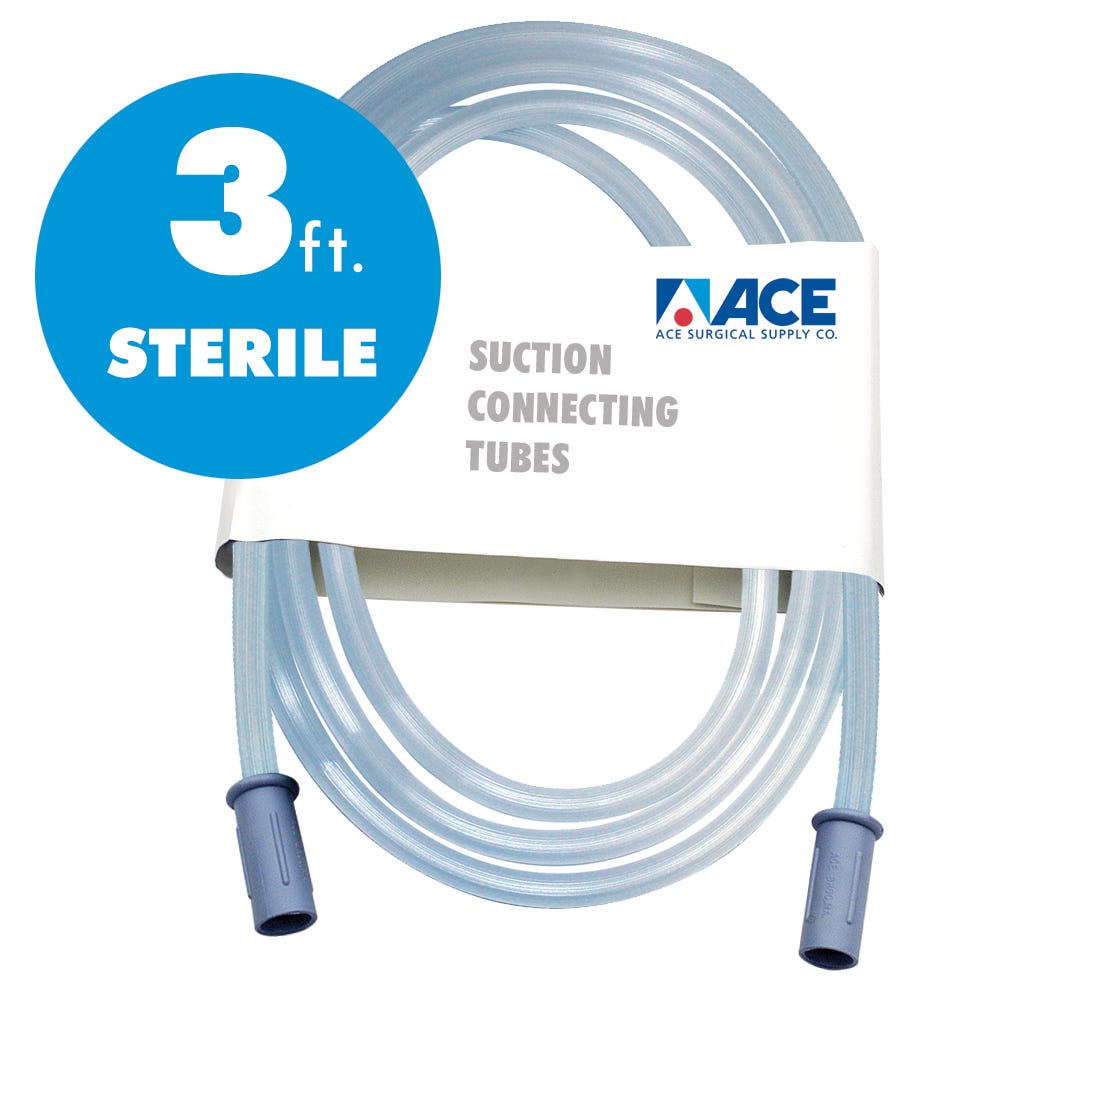 ACE Suction Connection Tubing Sterile - Clear with Blue Tint, 3' long,  1/4" I.D. -20/Case